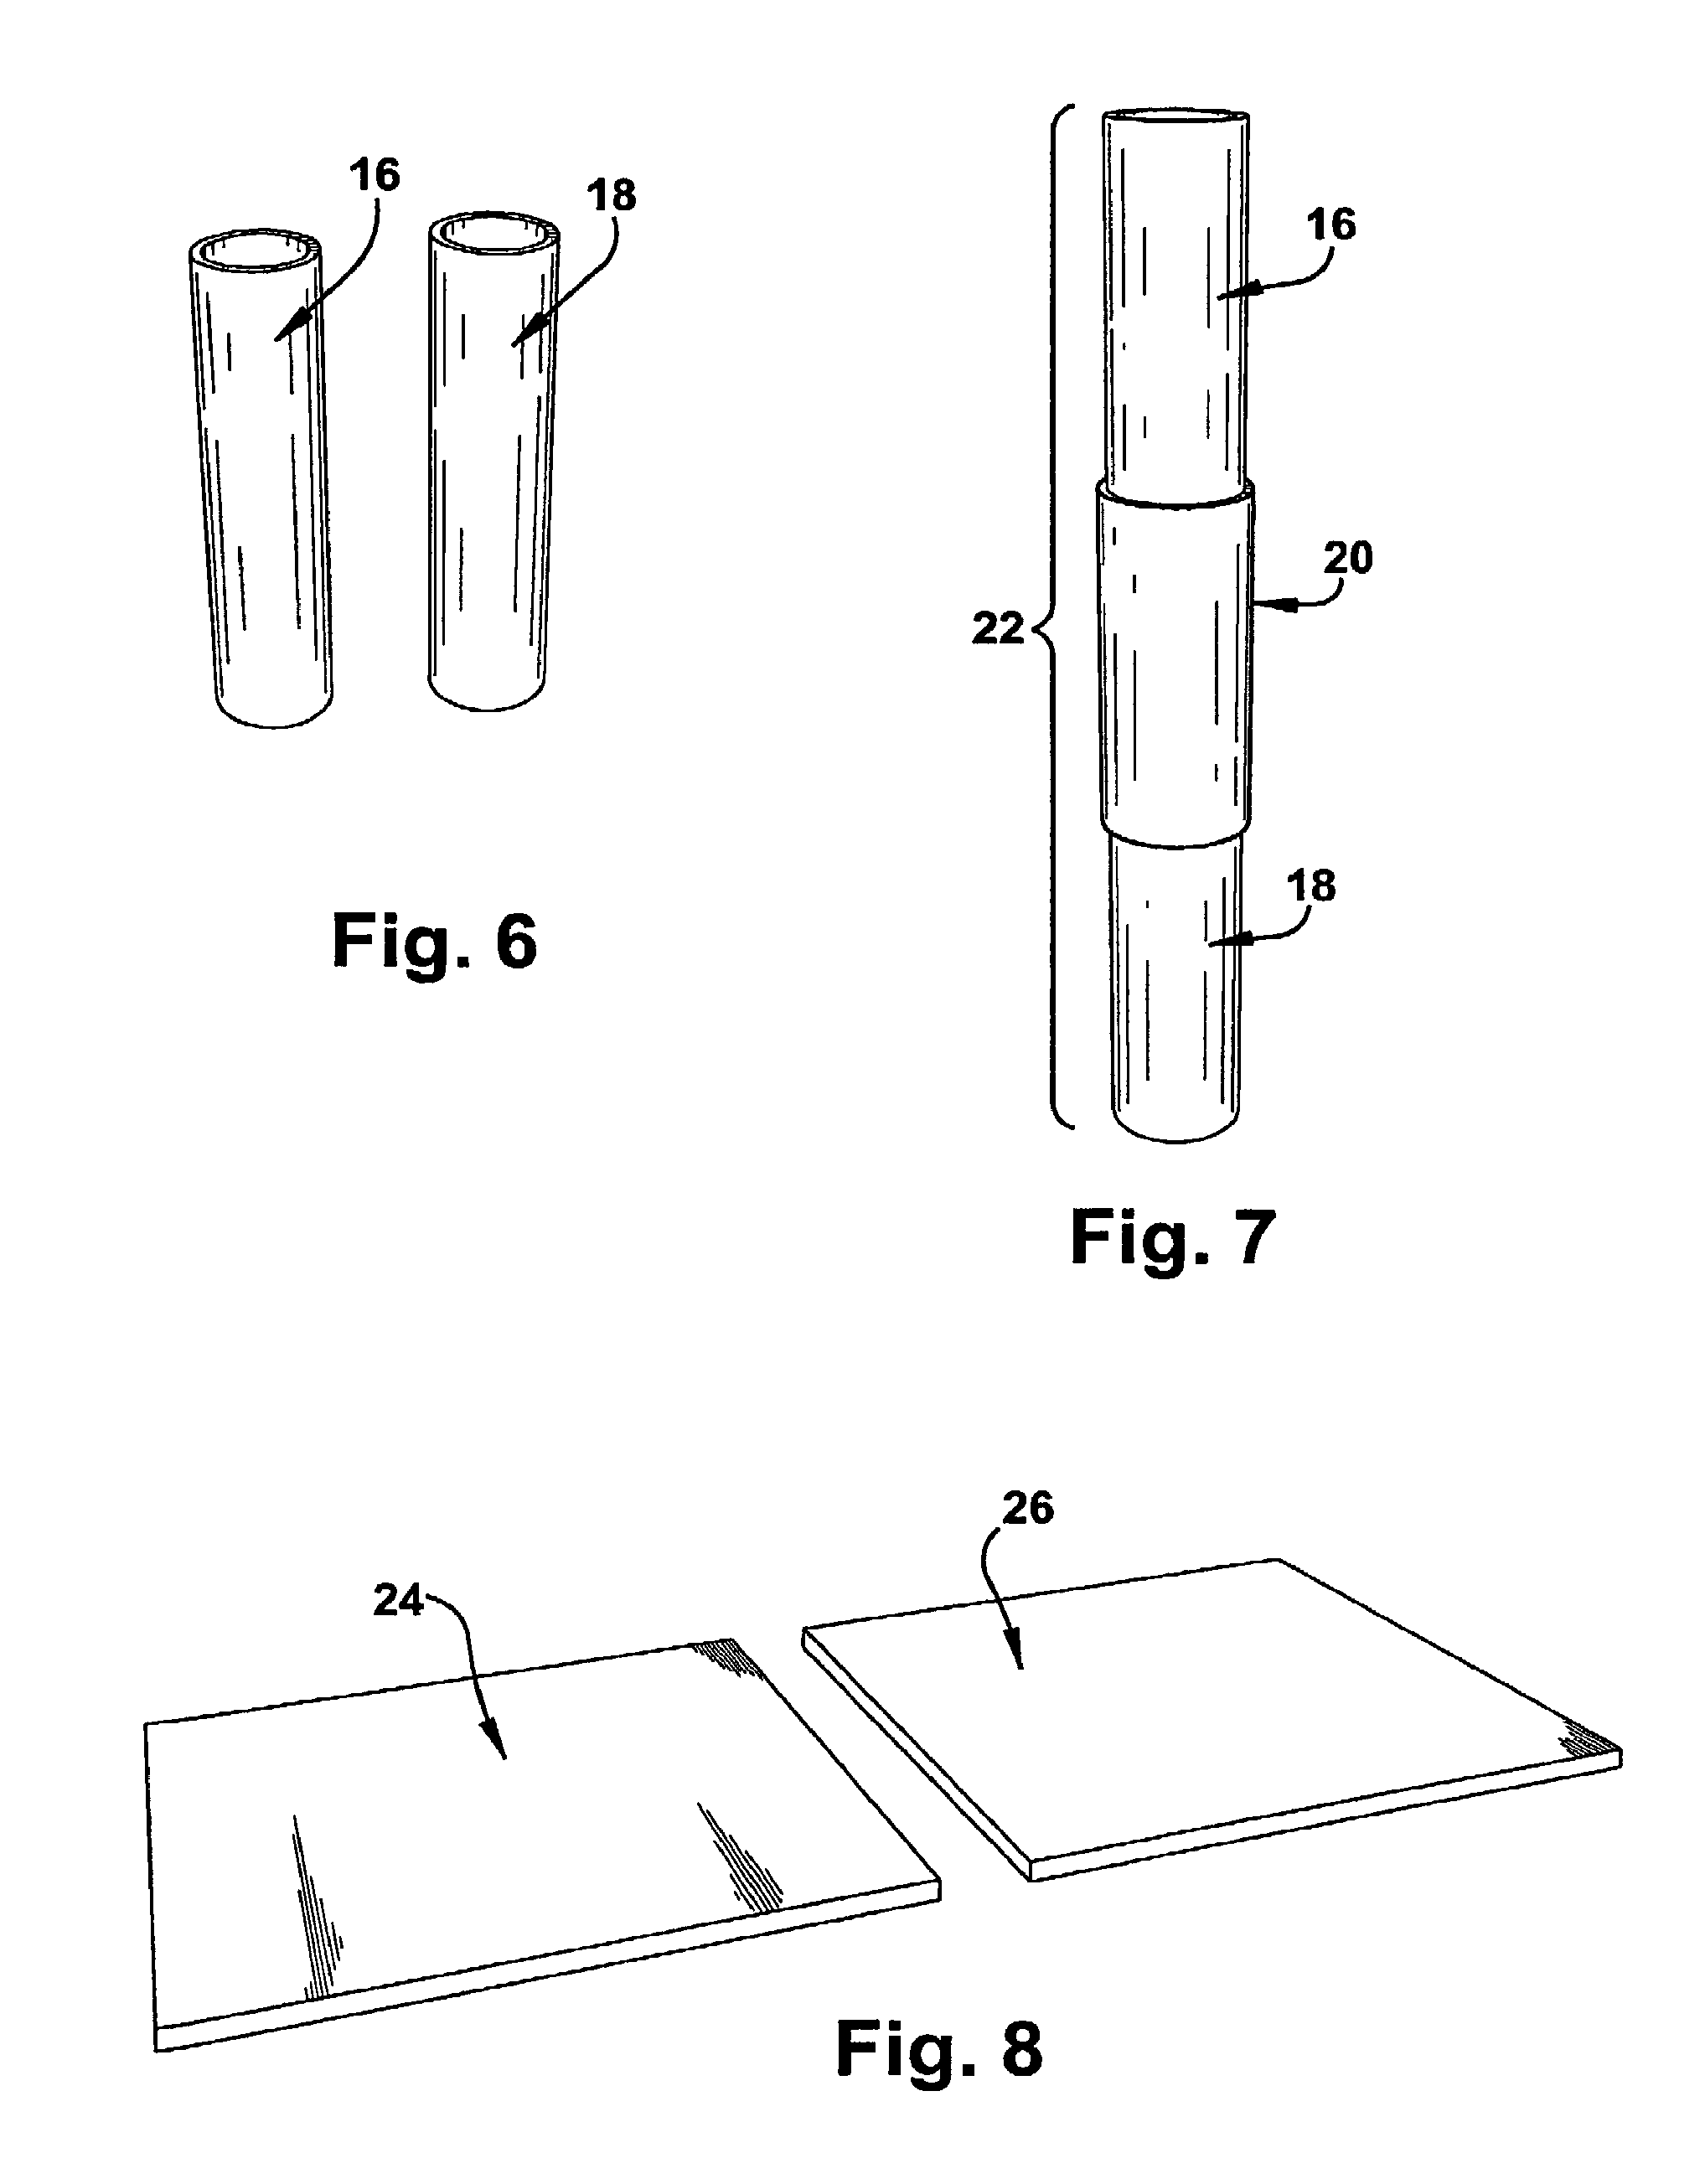 Method of making and using shape memory polymer composite patches